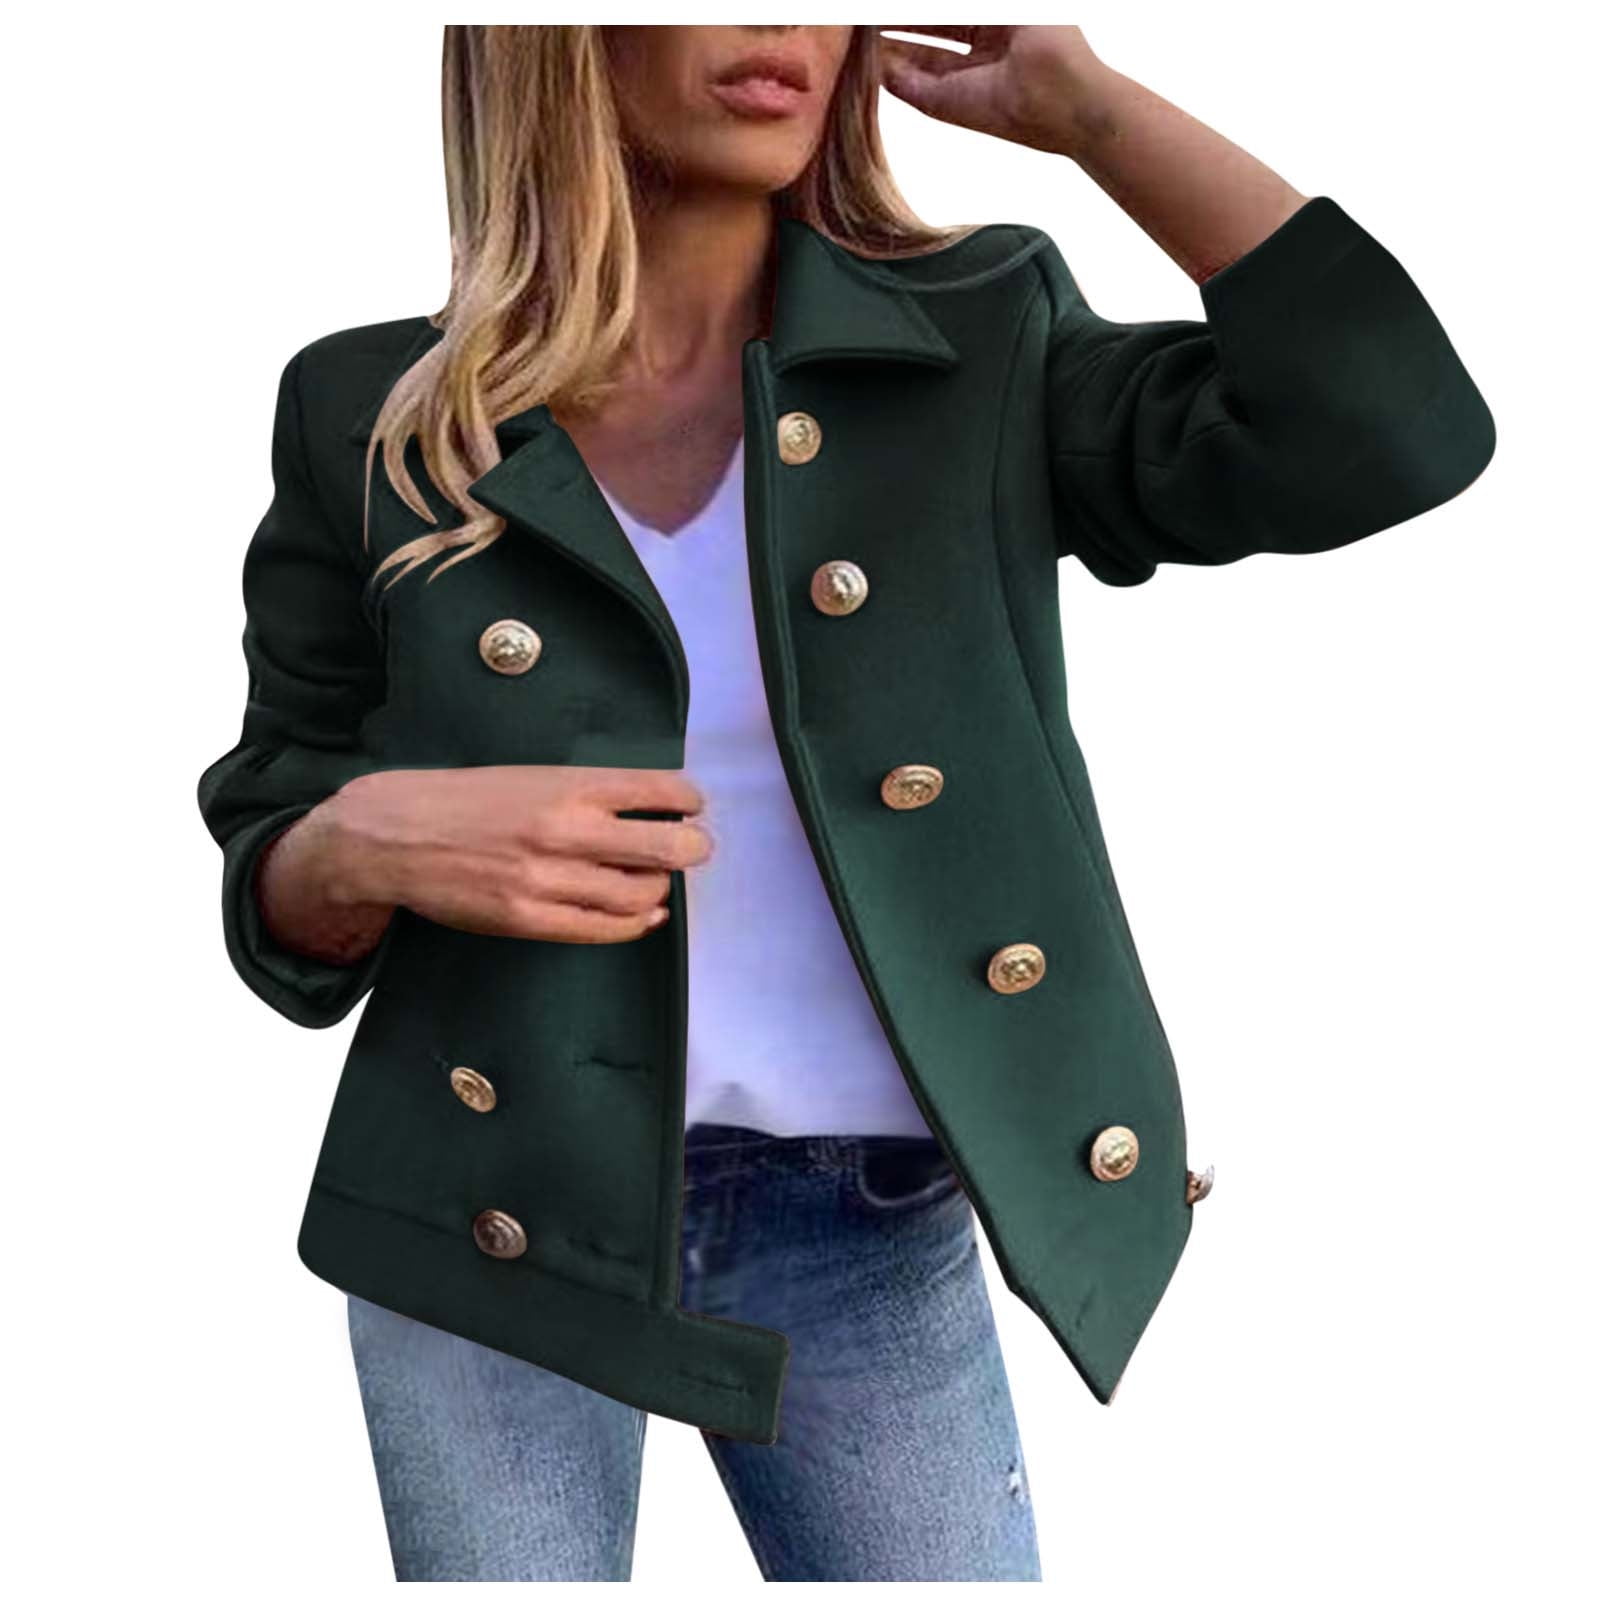 Womens Plus Size Clearance ! BVnarty Women's Jacket Coat Solid